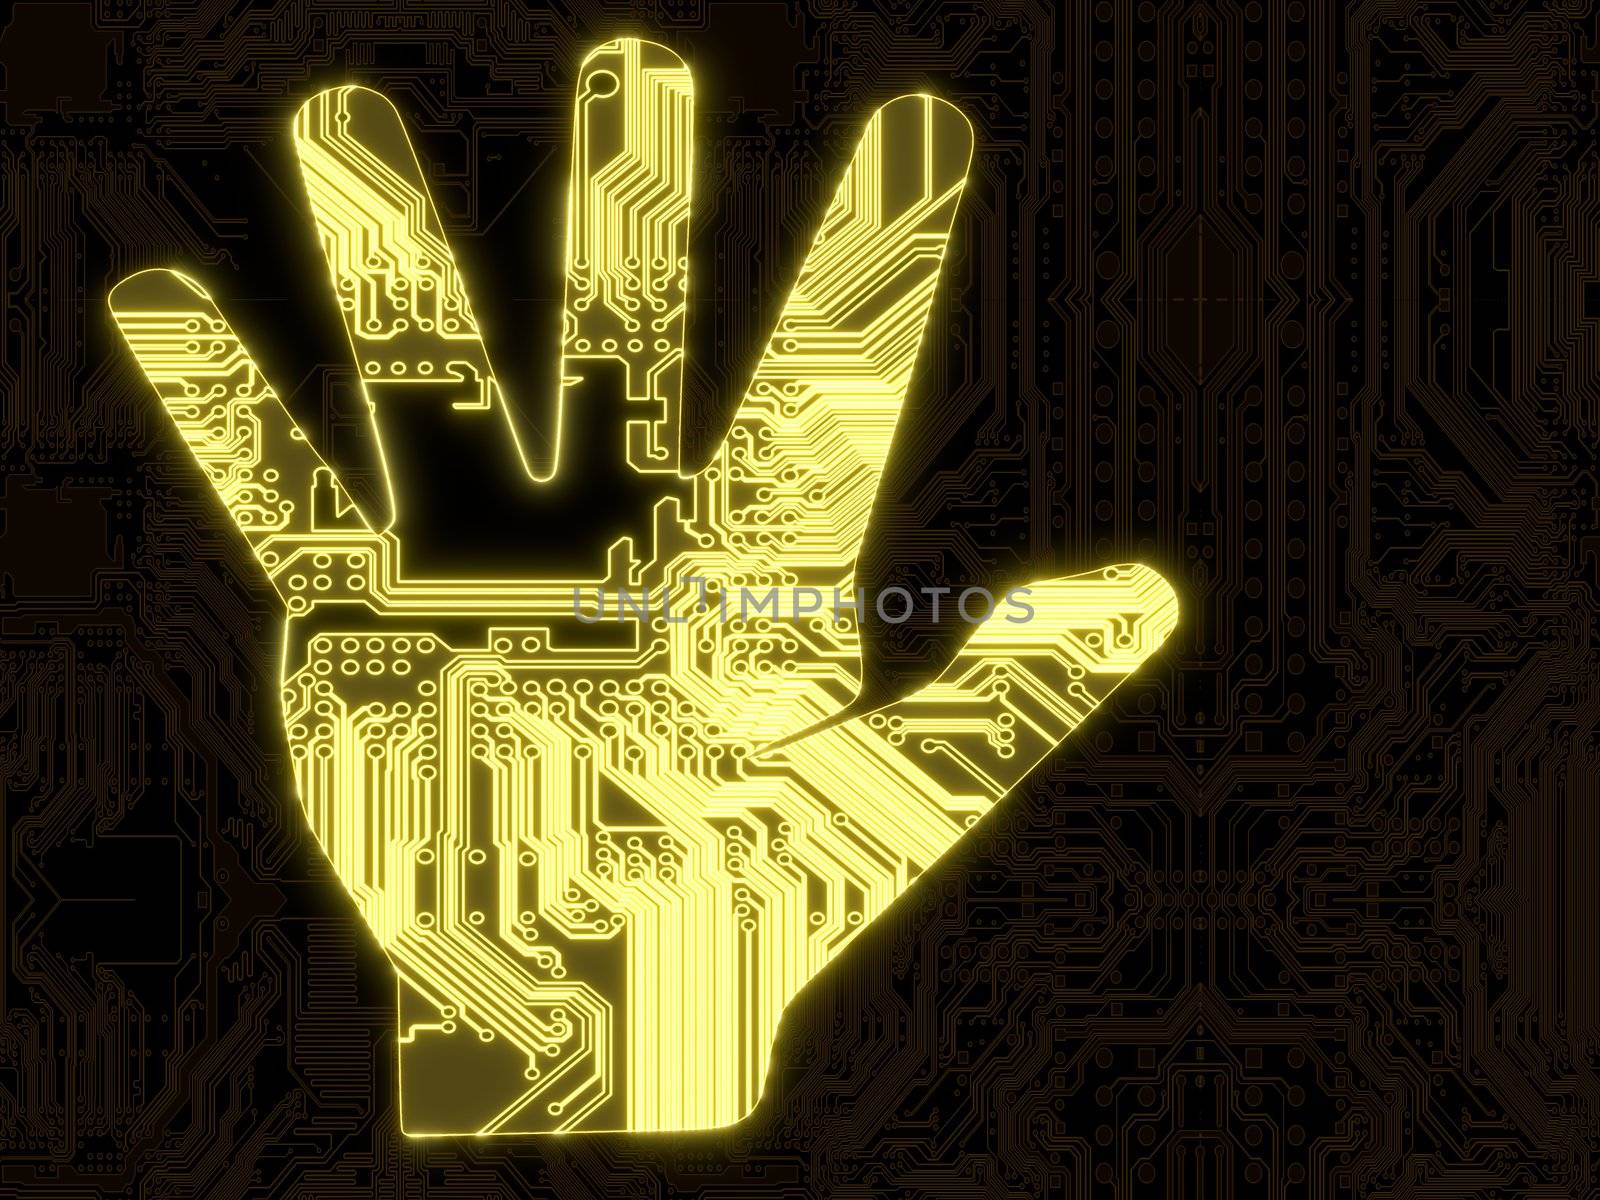 Glowing attention hand symbol on a computer chip by onirb